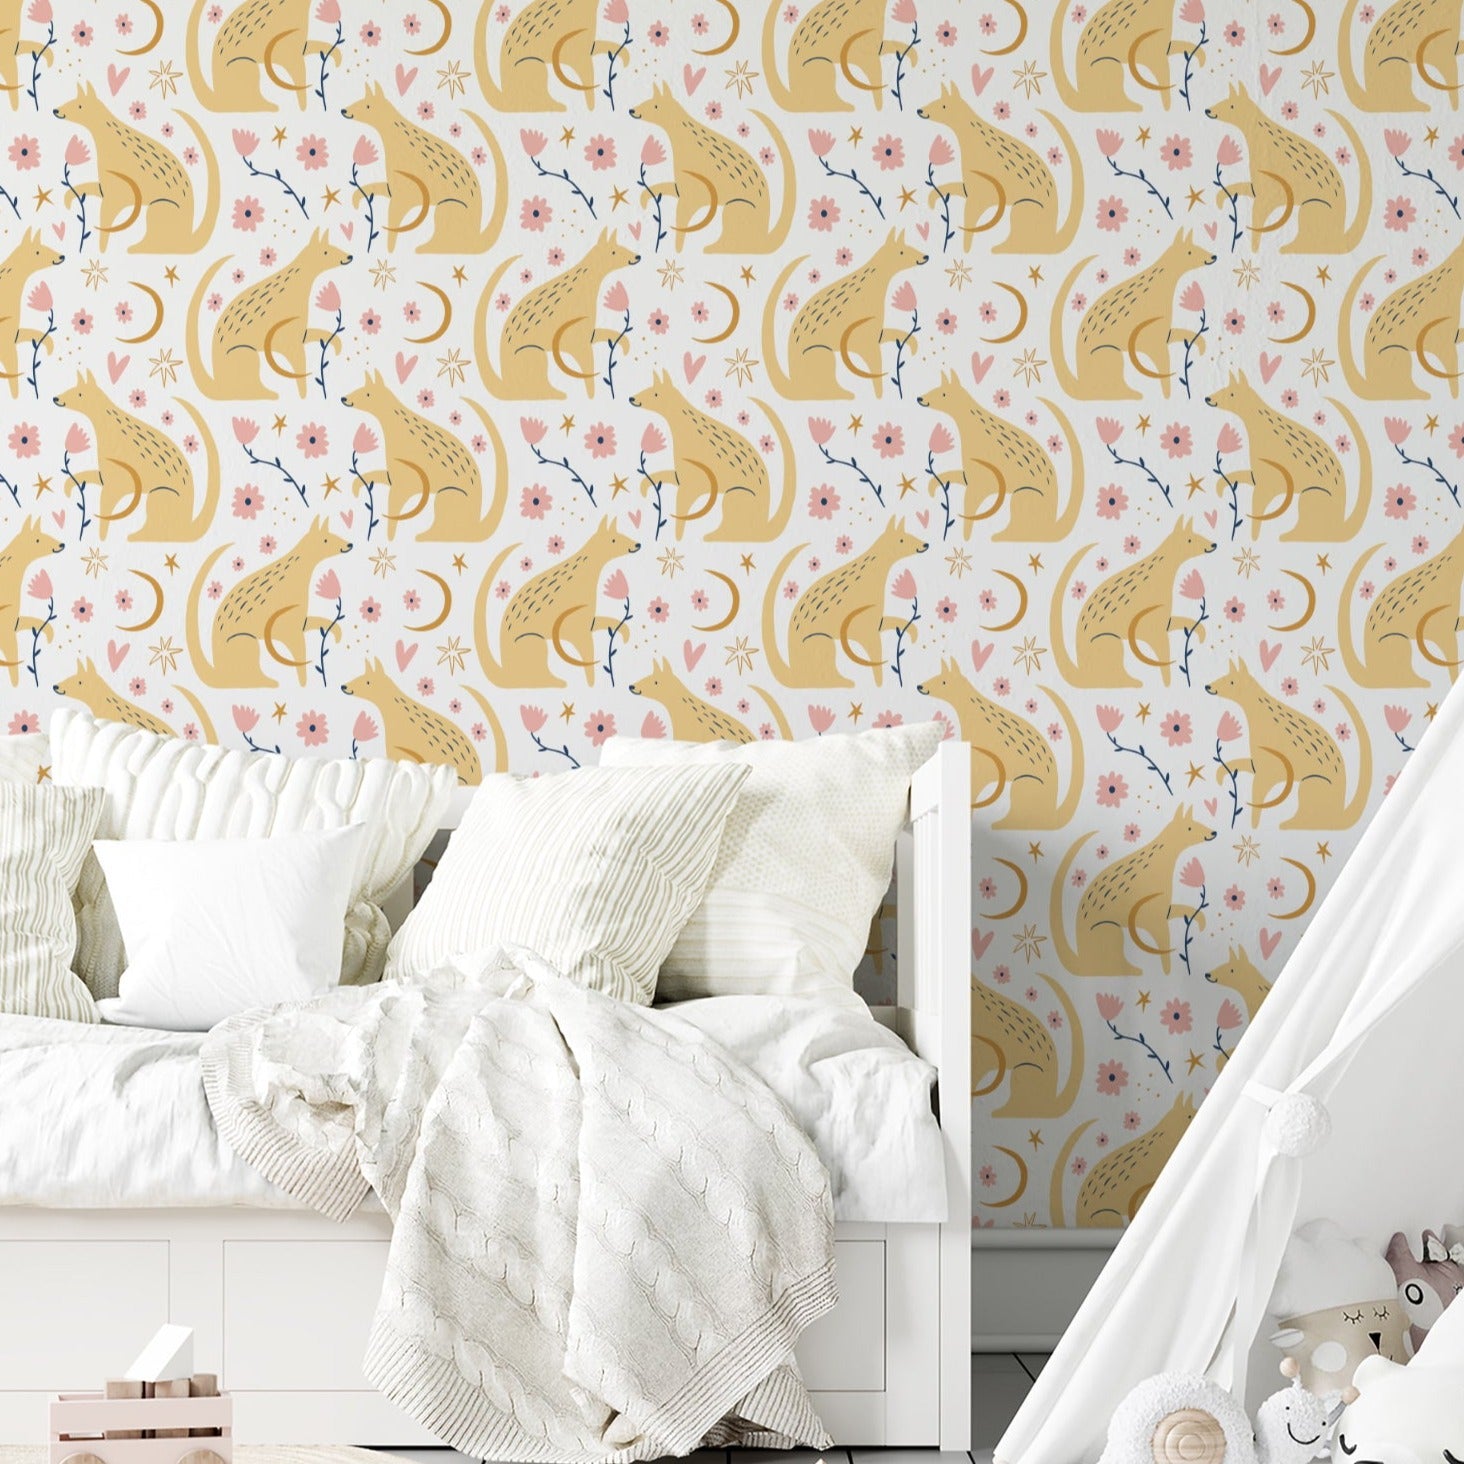 A charming children's room decorated with 'Dog Wallpaper 41,' displaying golden dogs, celestial motifs, and floral elements. The space is complemented by a white teepee, soft bedding, and playful toys, creating a dreamy and inviting atmosphere.